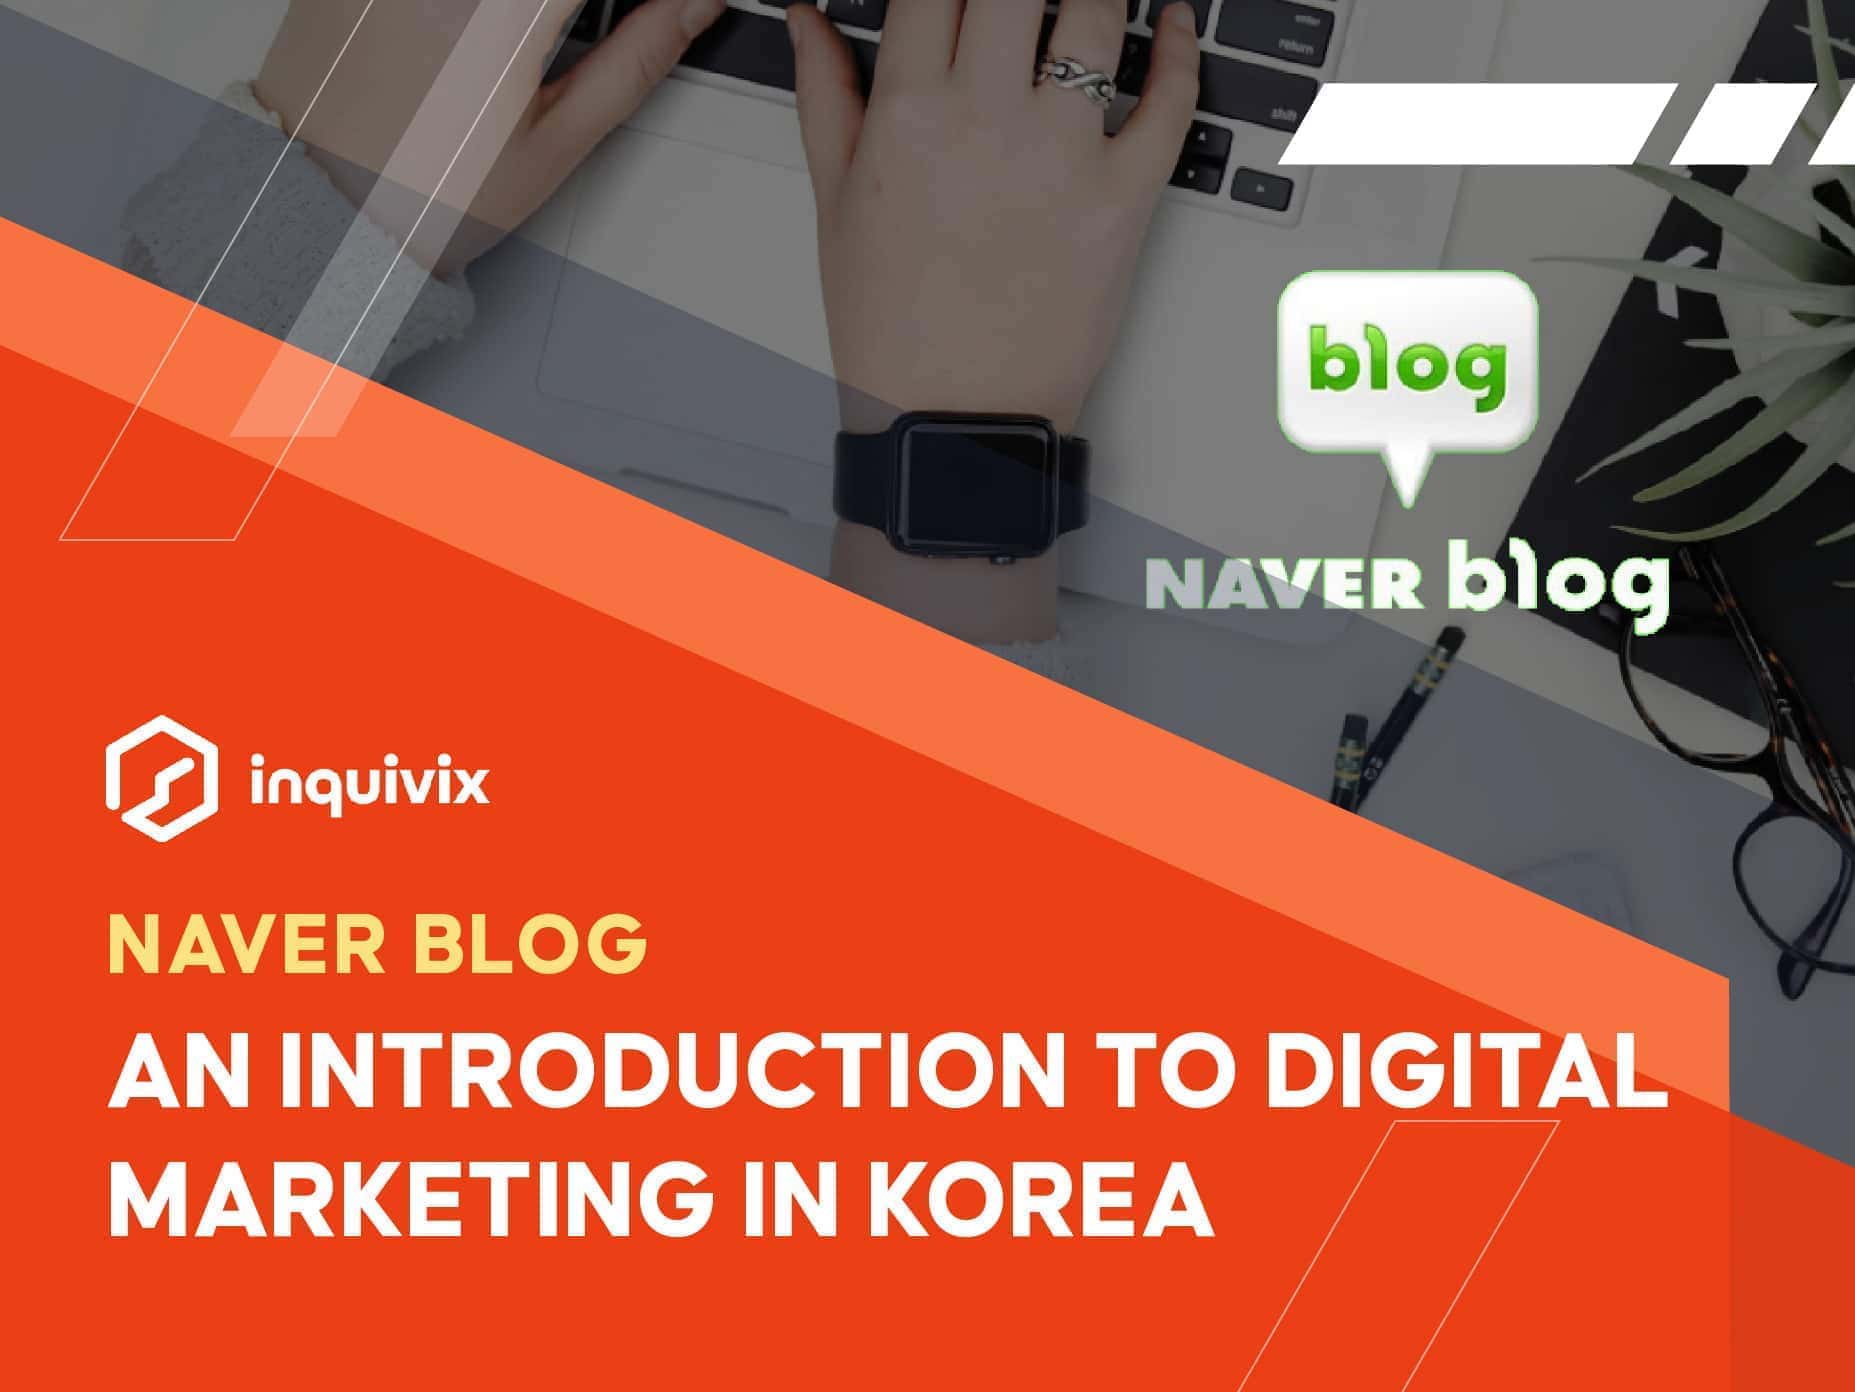 NAVER BLOG- AN INTRODUCTION TO DIGITAL MARKETING IN KOREA